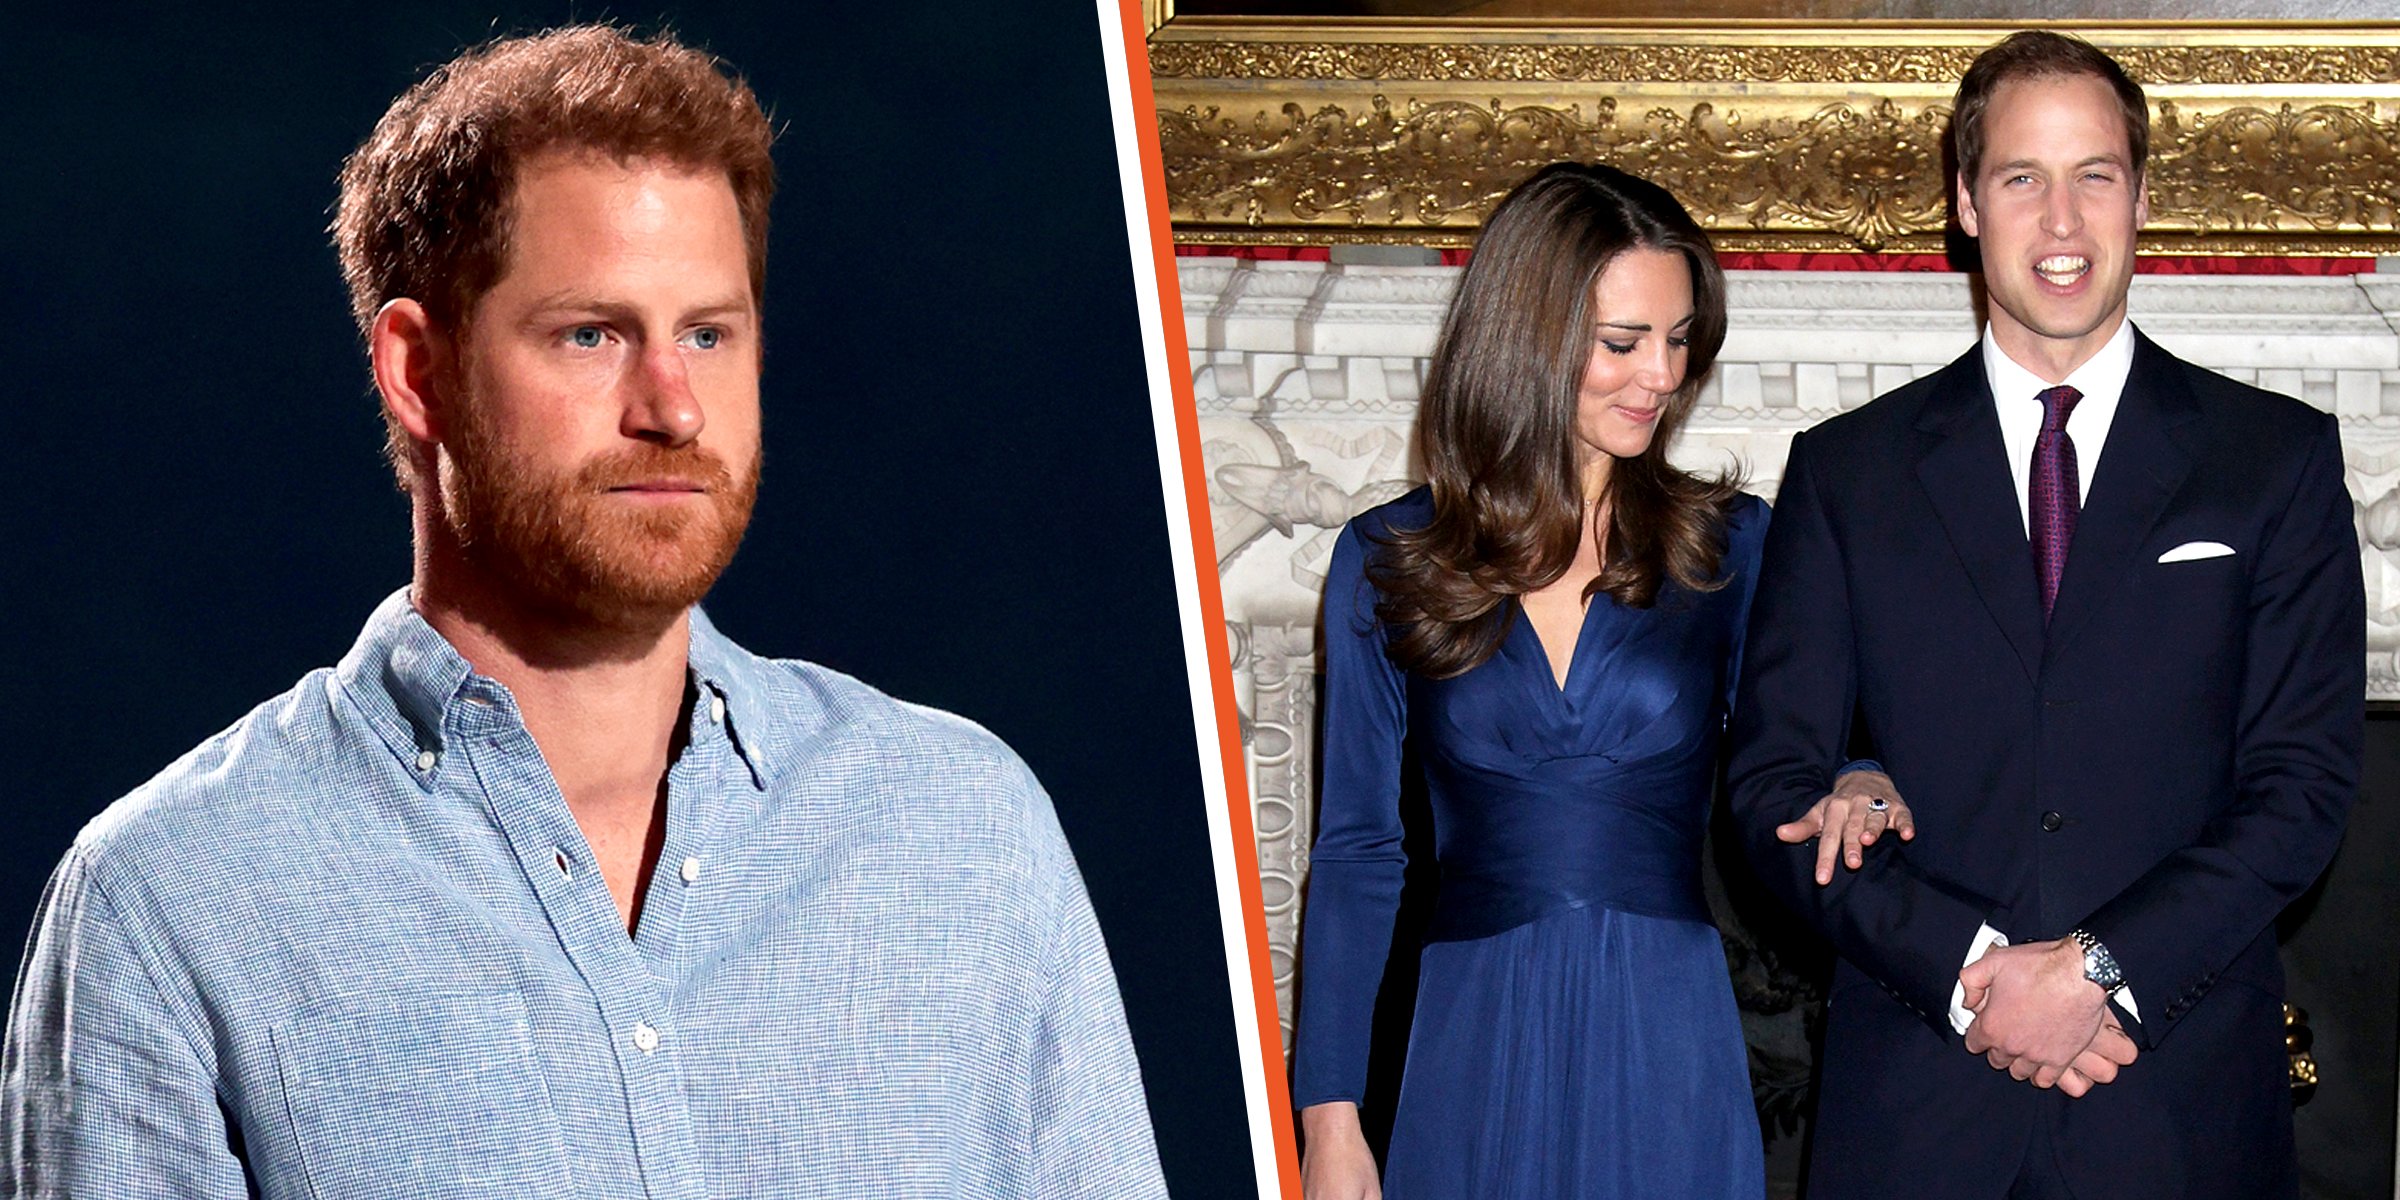 Prince Harry | Duchess of Wales, Kate Middleton, and Prince William | Source: Getty Images